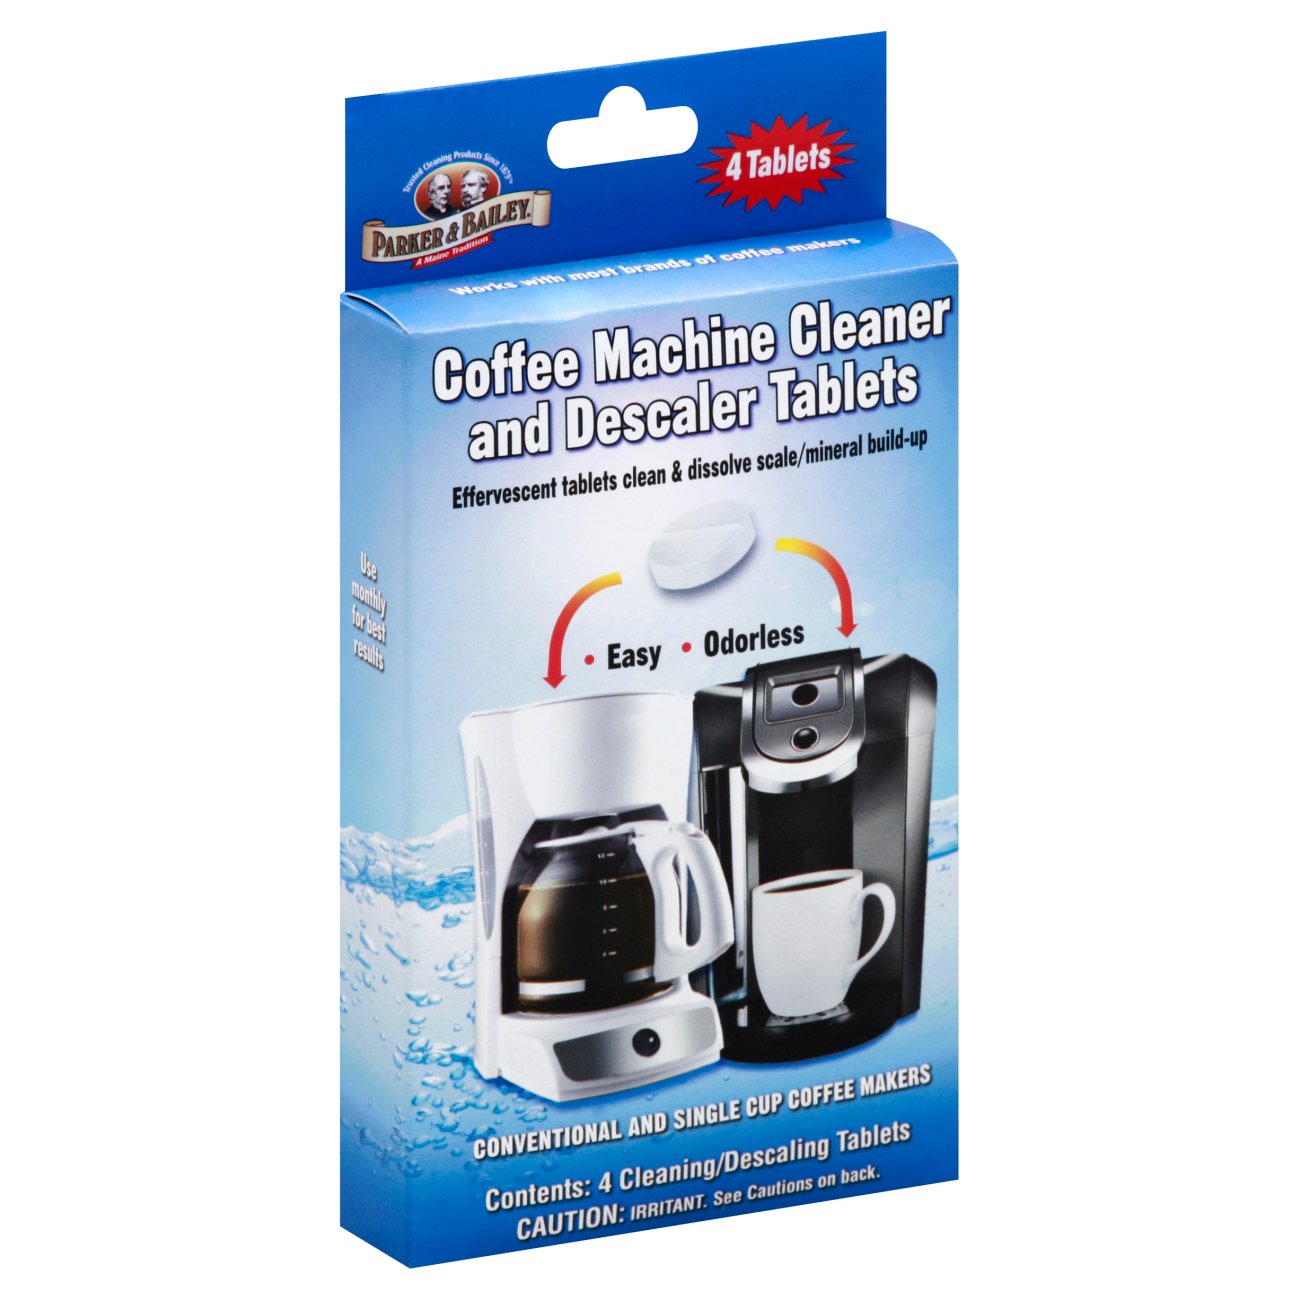 ACTIVE launches new coffee maker cleaner tablets